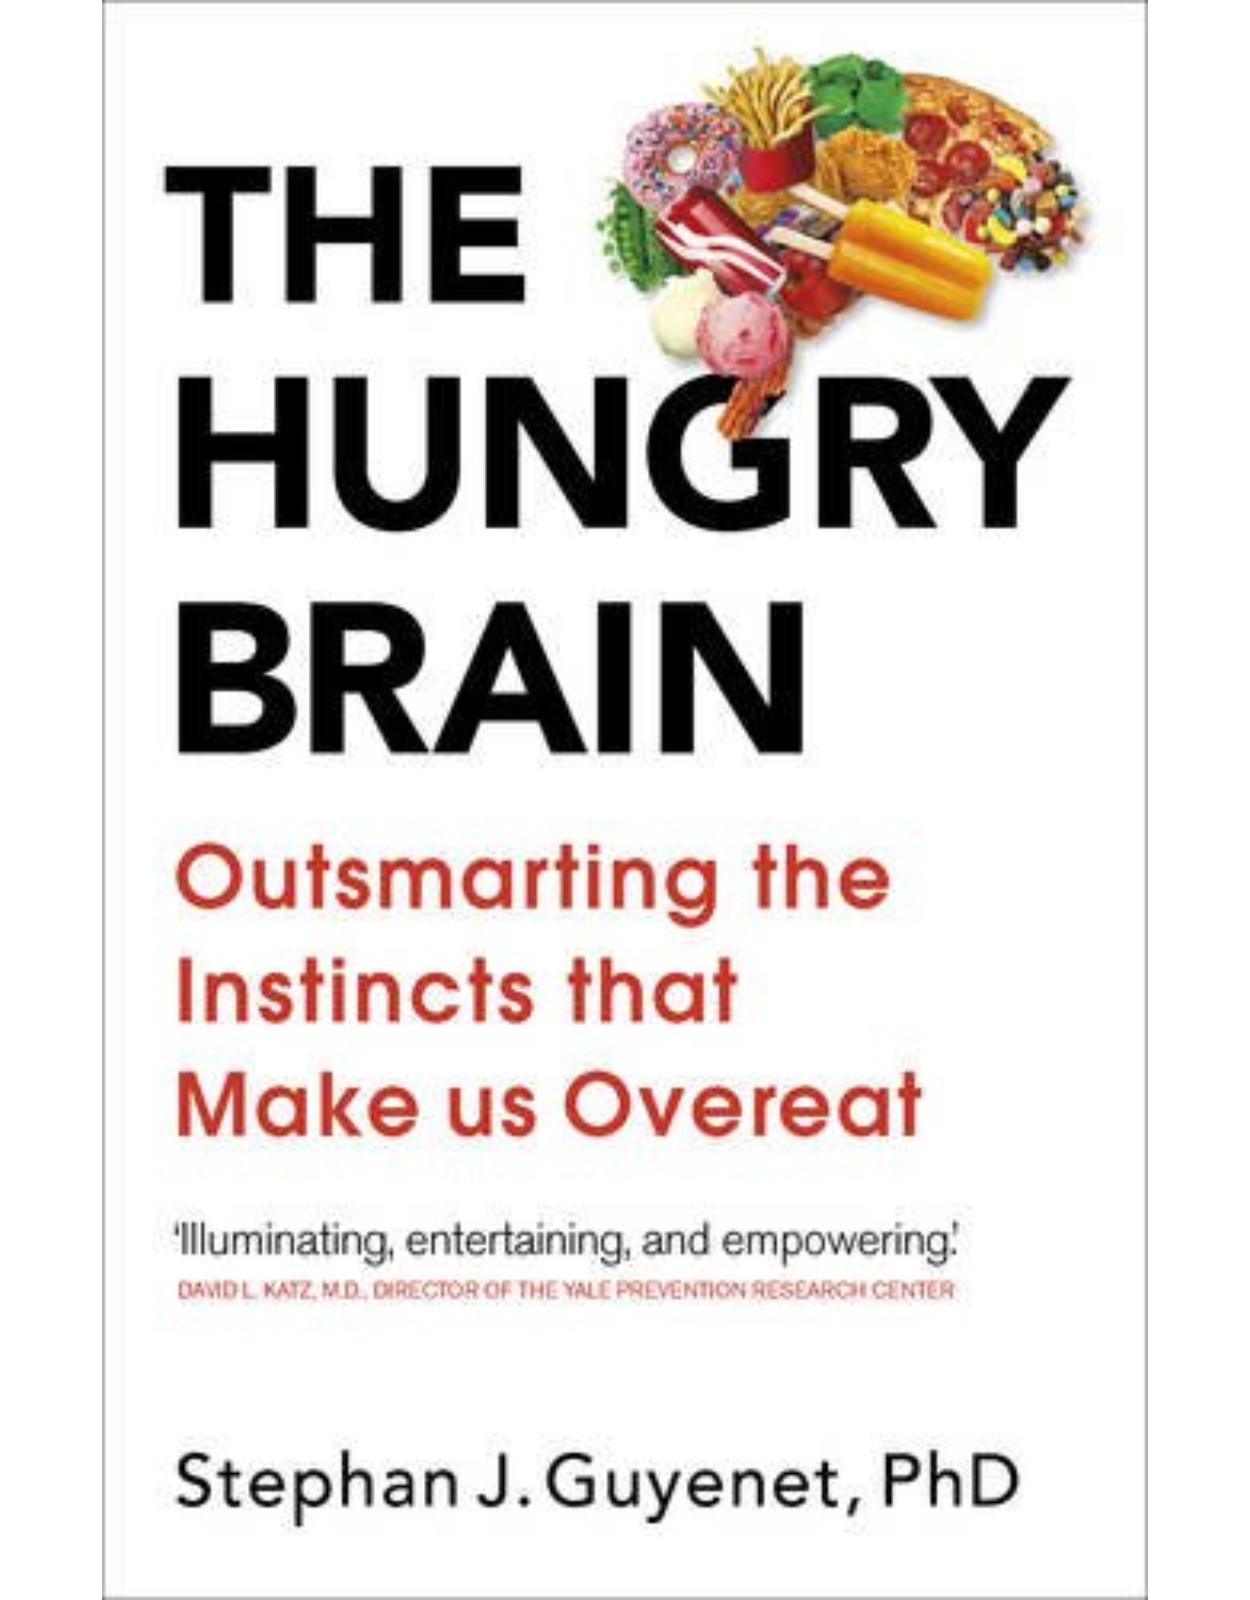 The Hungry Brain: Outsmarting the Instincts That Make Us Overeat